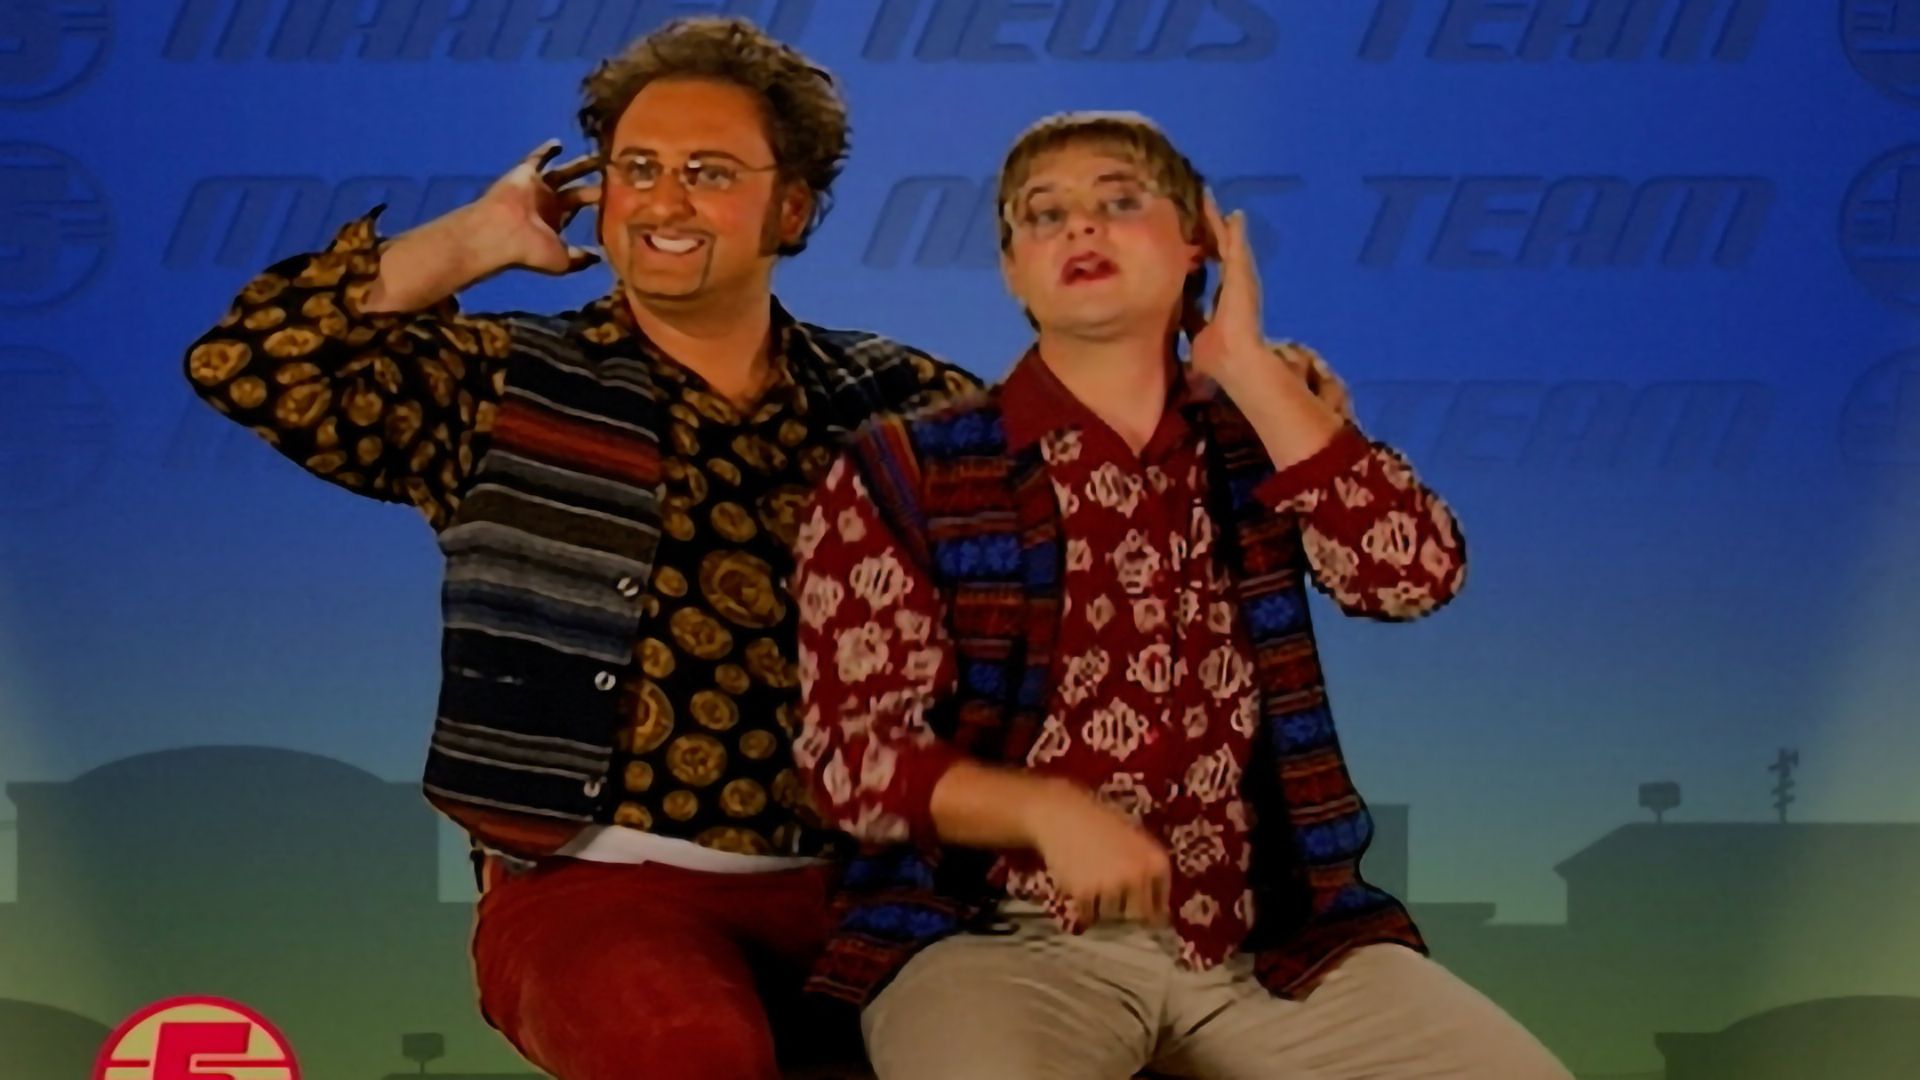 Are tim and eric married?